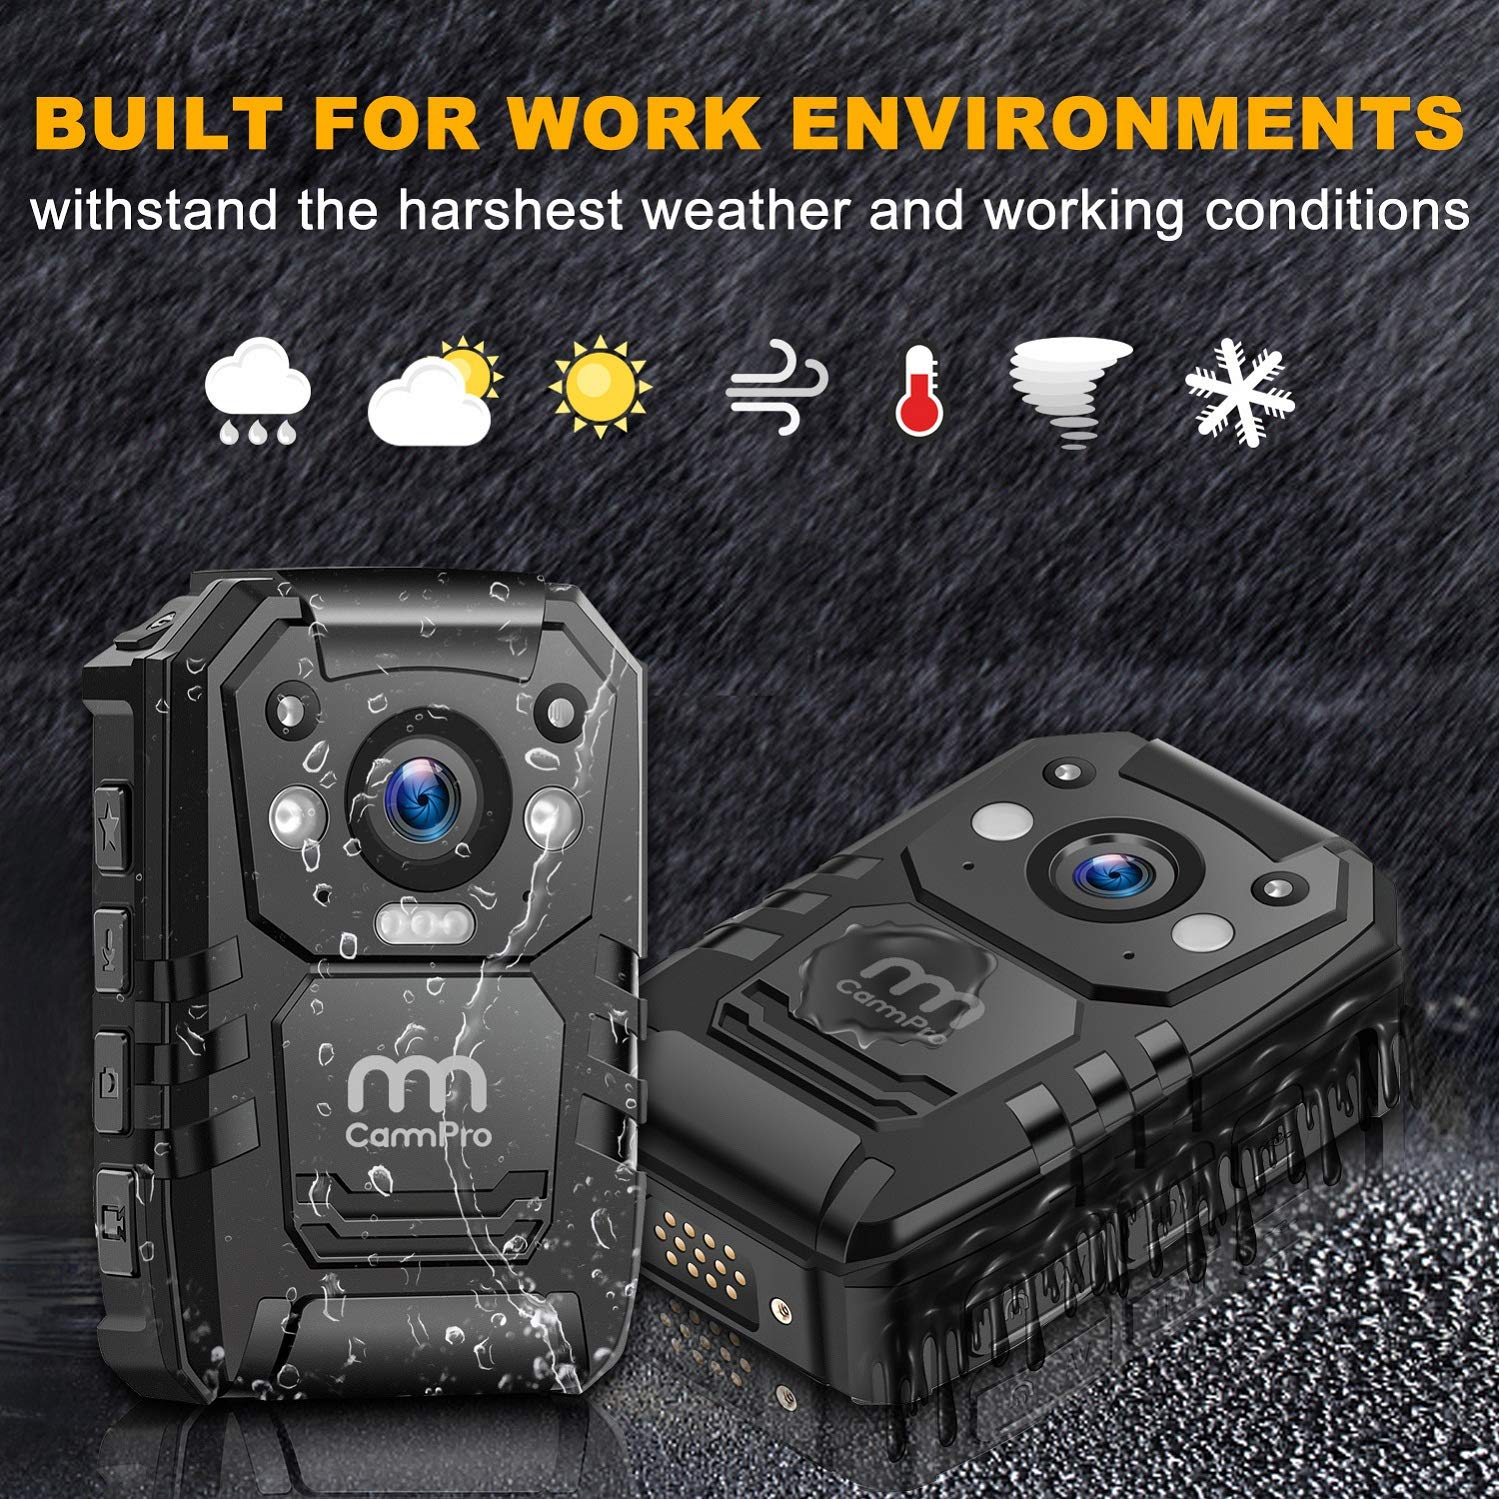 CammPro I826 1296P HD Police Body Camera,128G Memory,Waterproof Premium Portable Body Worn Camera with Audio Recording Wearable,Night Vision,GPS for Law Enforcement